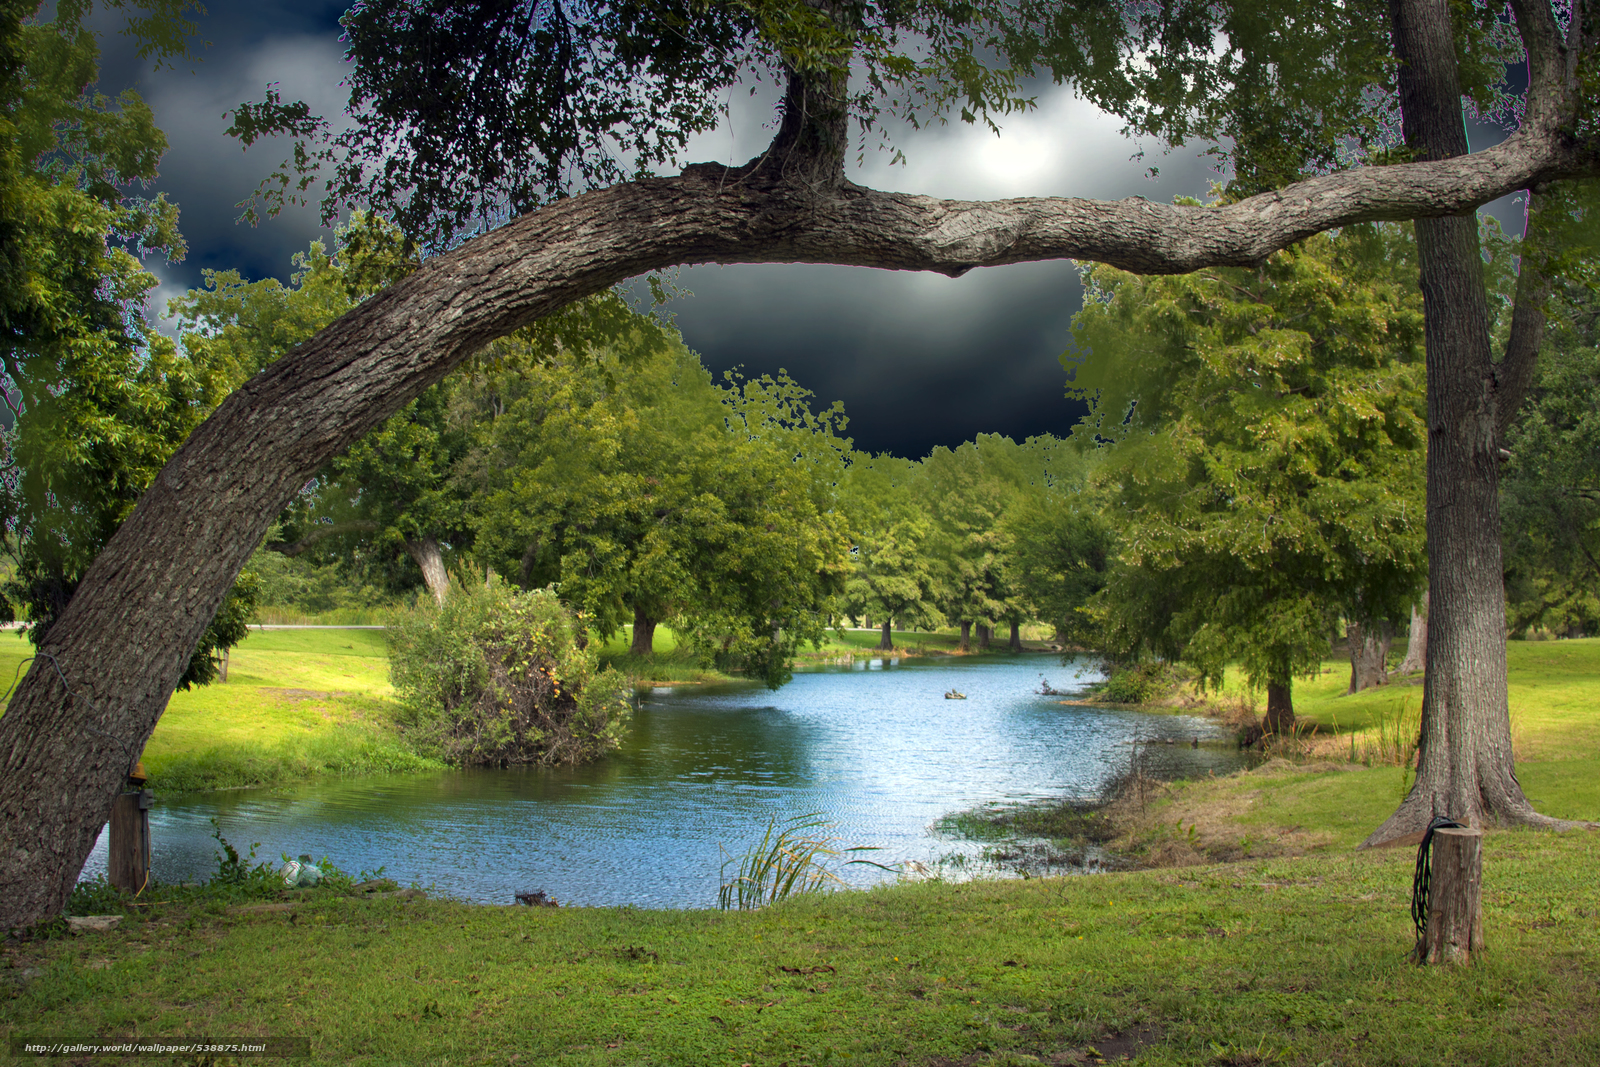 Download wallpaper The Ranch at Clear Springs texas USA free desktop